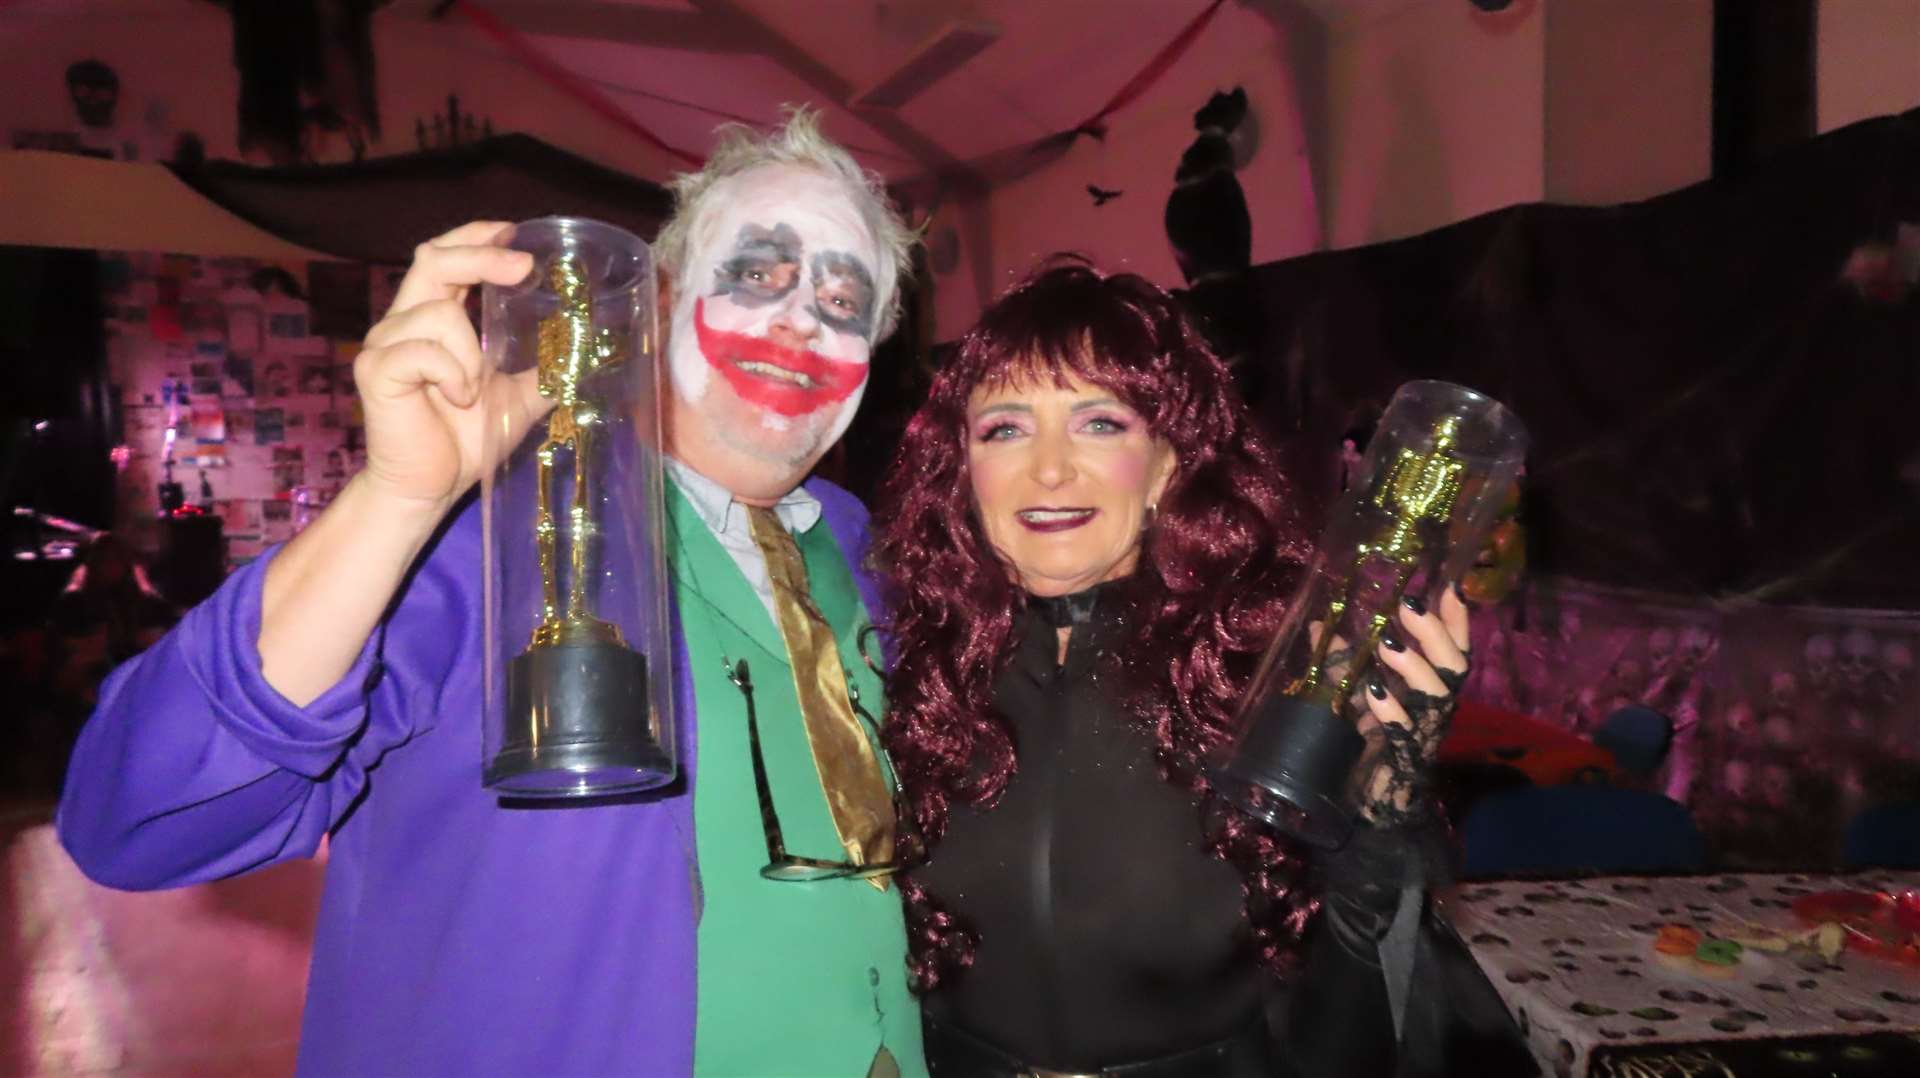 Ashley Smith and Bev Morrison won the fancy dress competition.